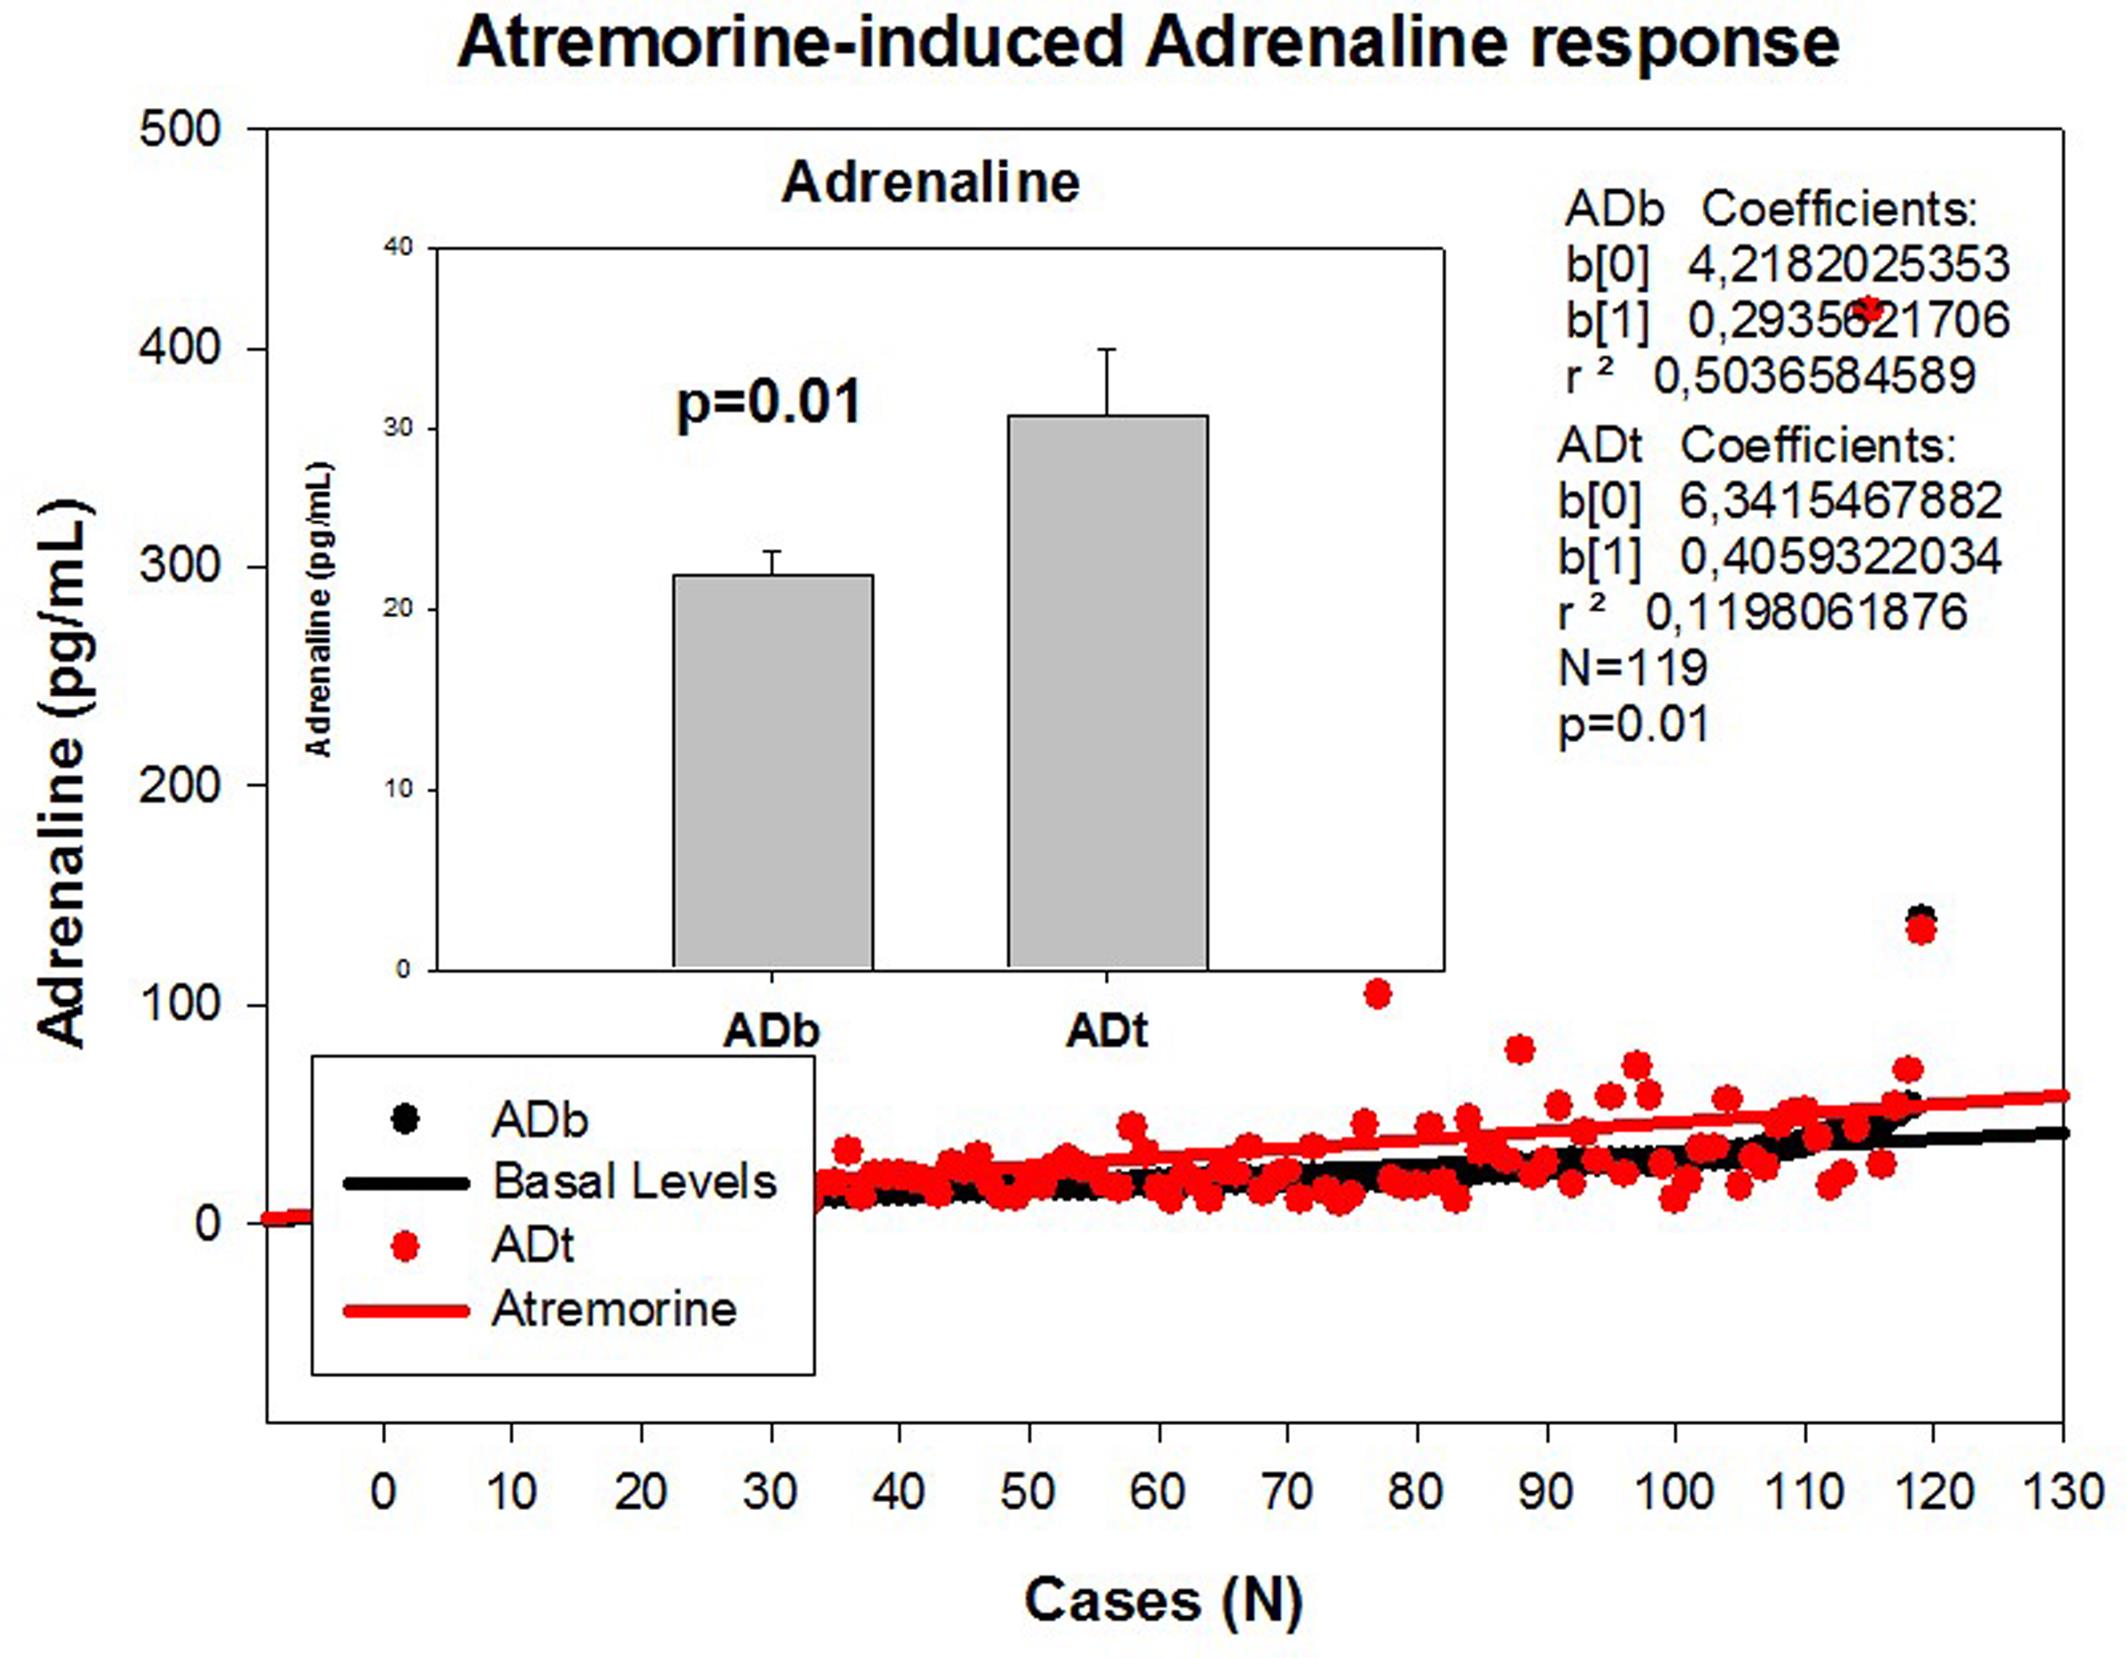 Atremorine-induced adrenaline (AD) response in patients with Parkinsonian disorders.